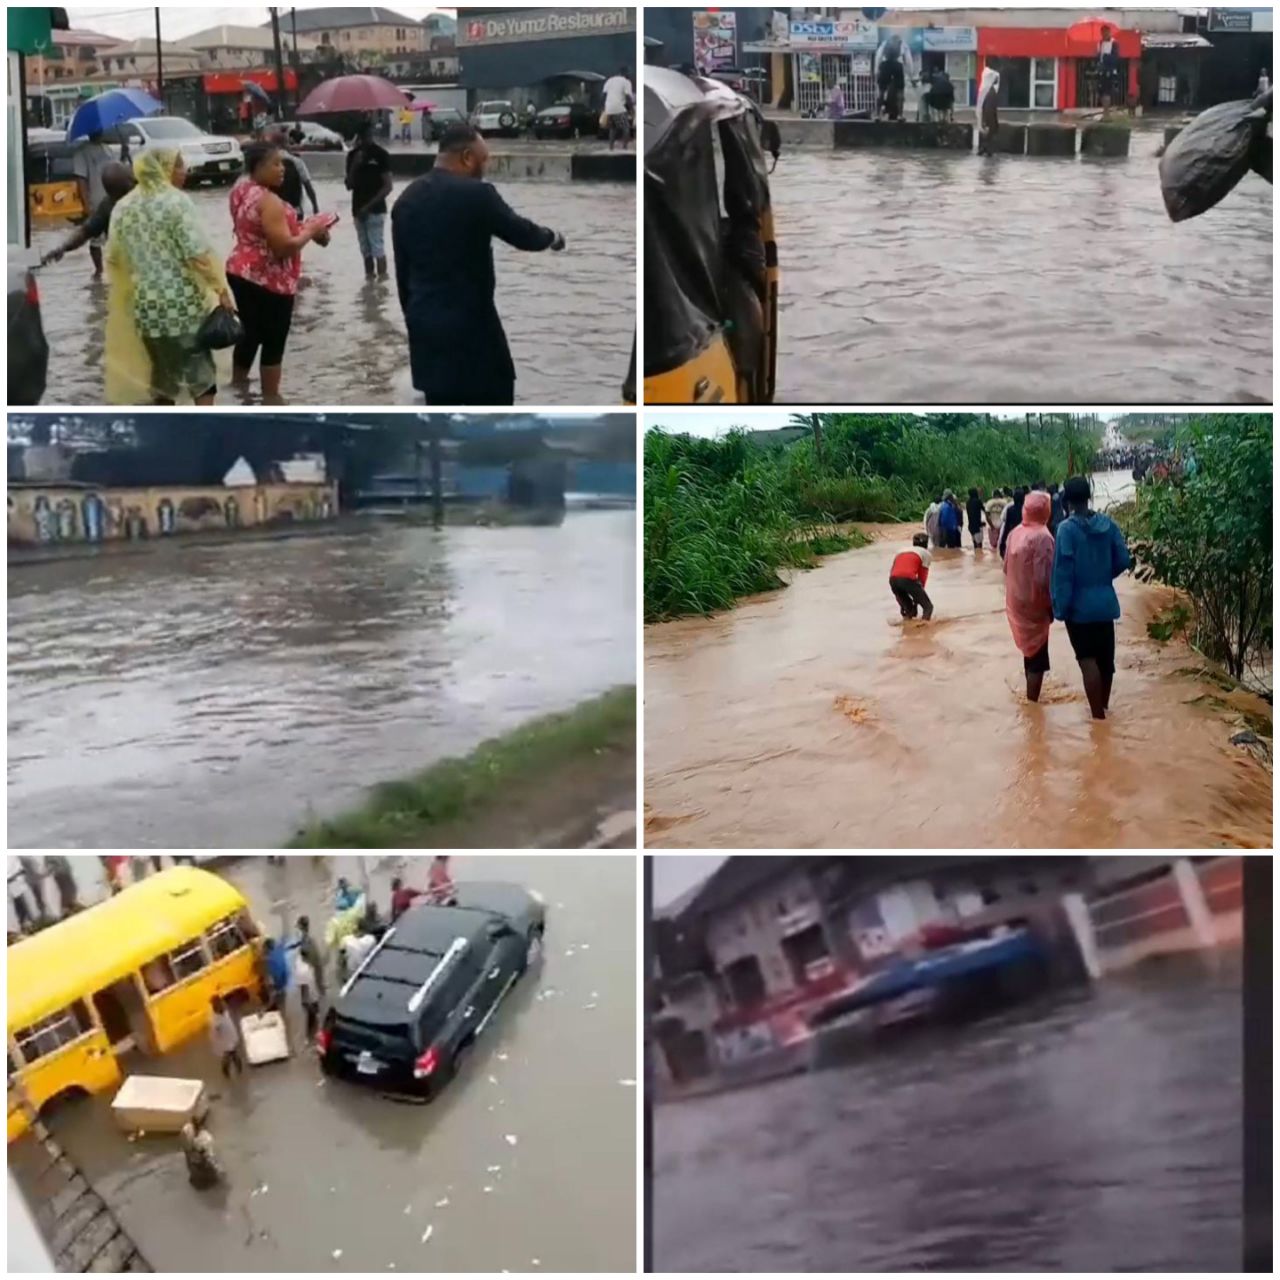 Flooding across Lagos on Saturday after a downpour